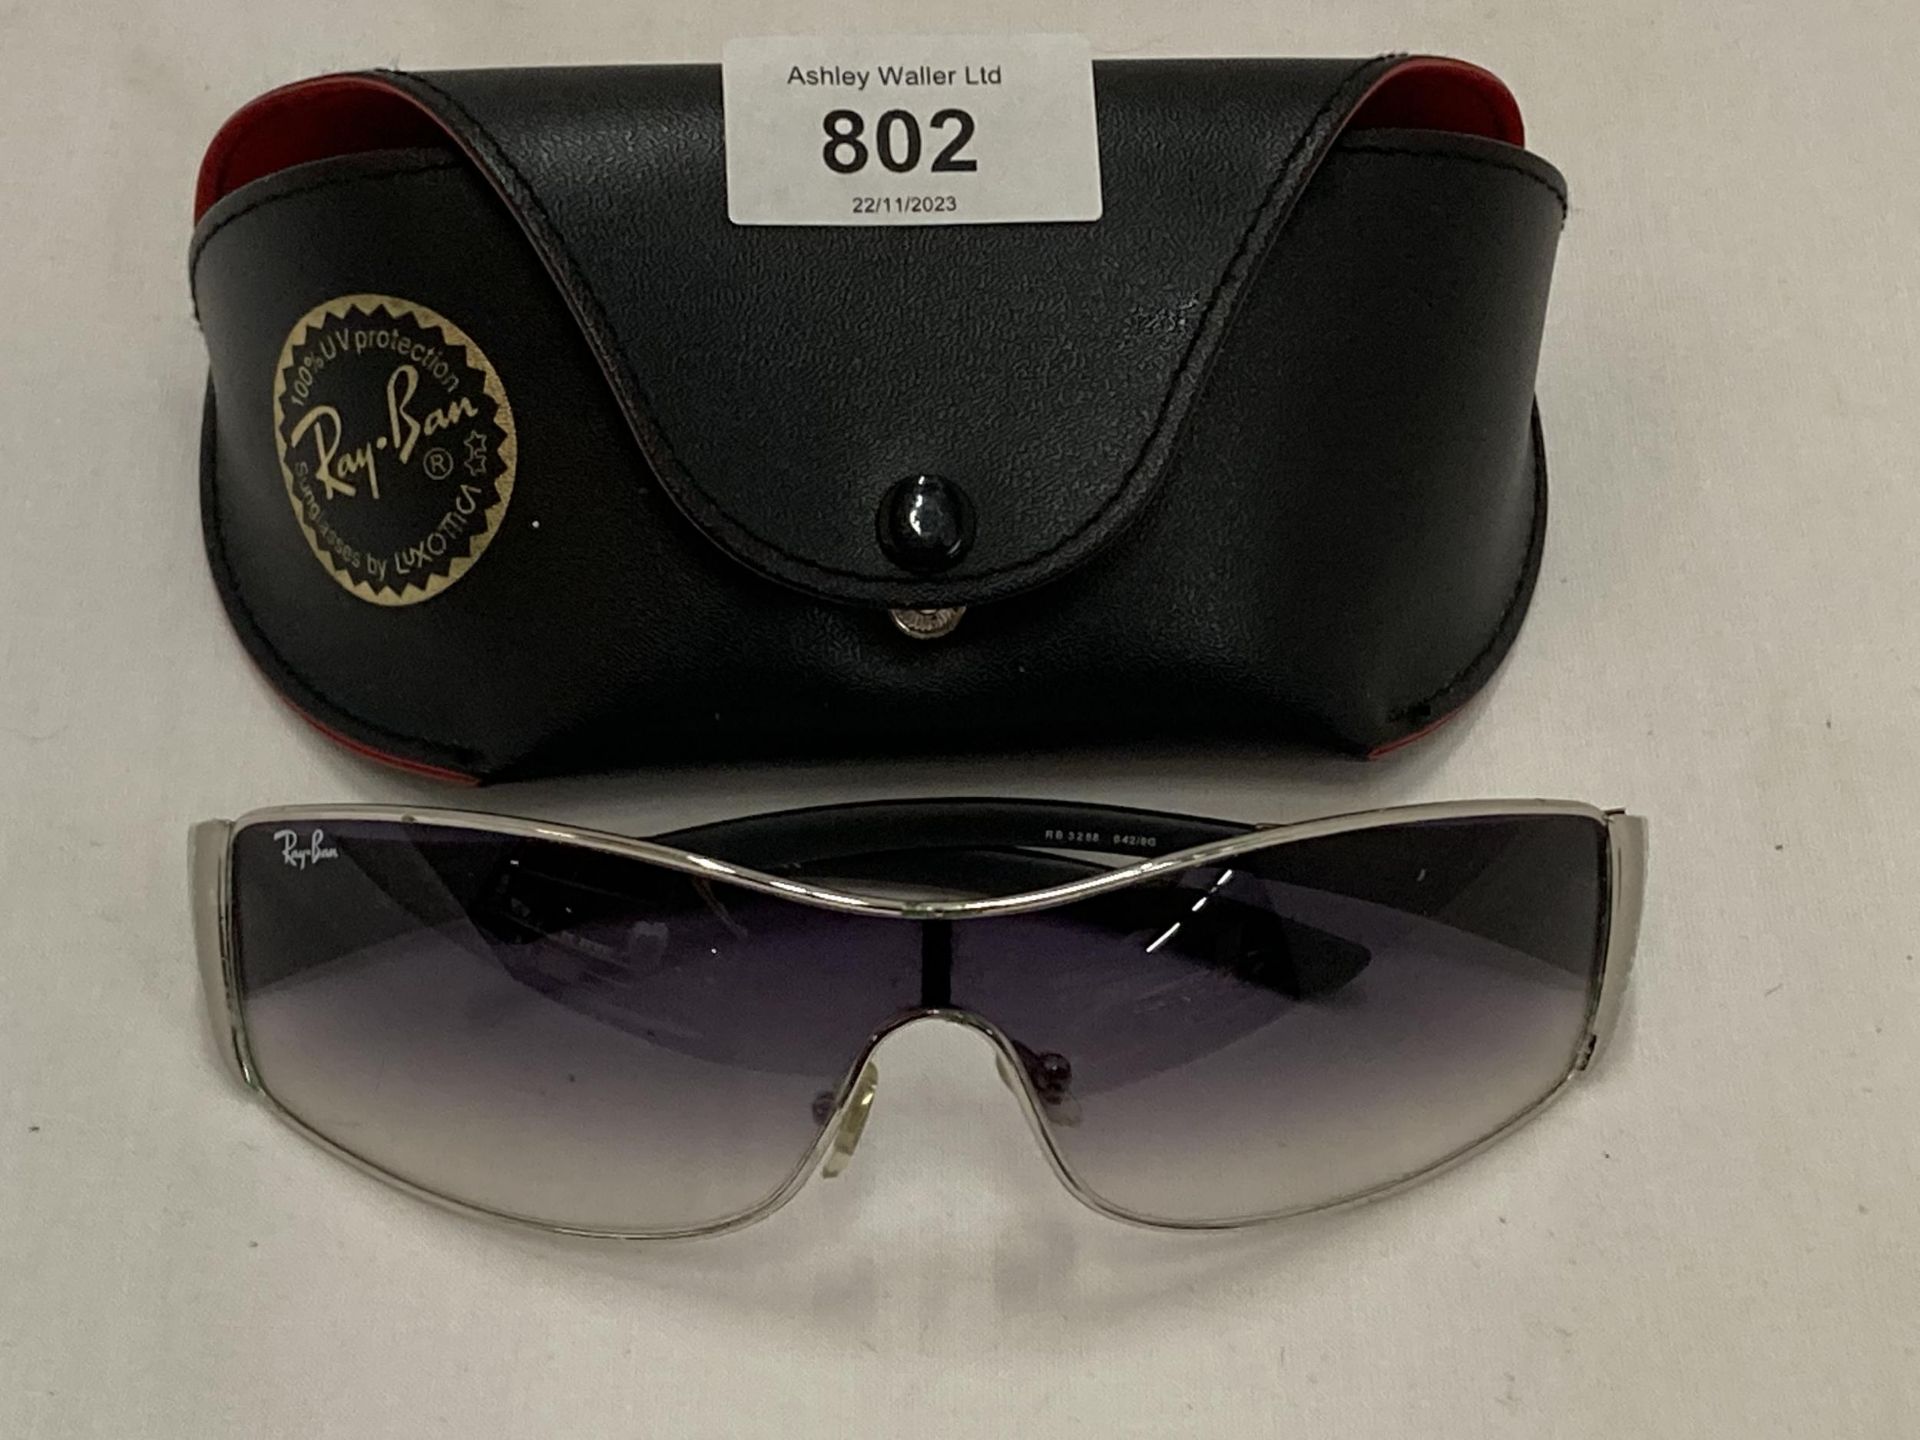 A PAIR OF RAY-BAN SUNGLASSES, CASED